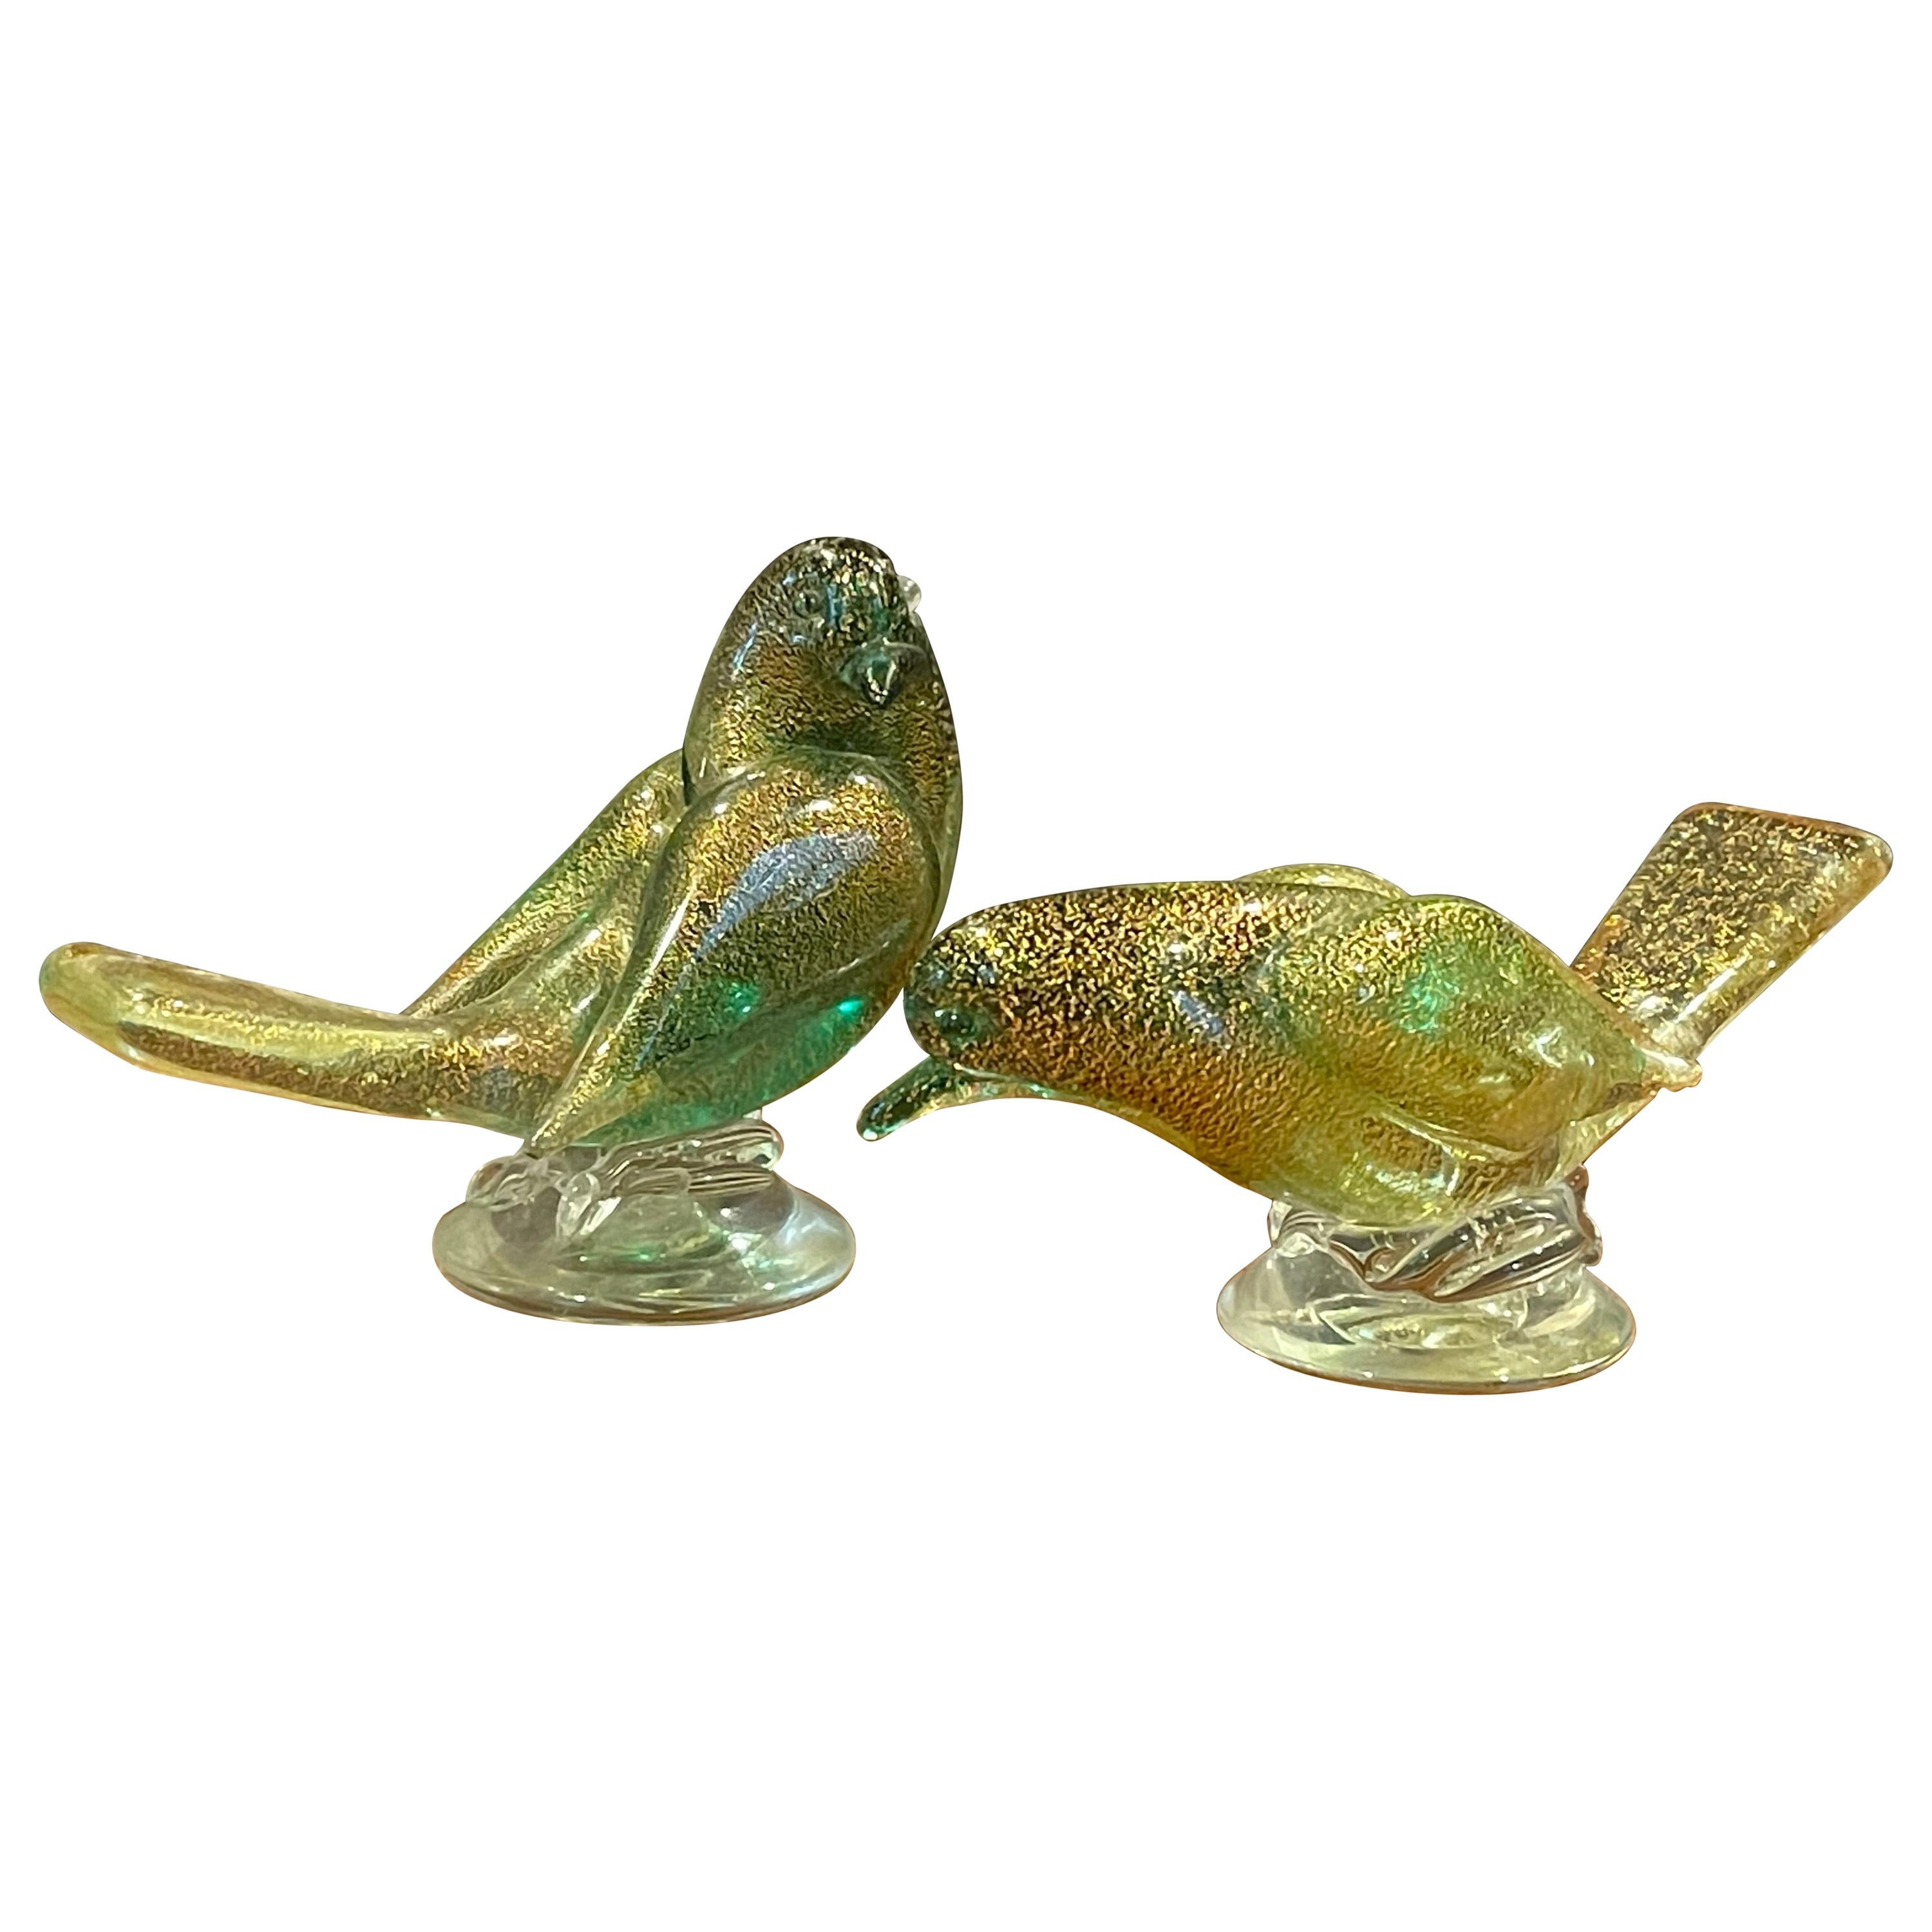 Pair of Sommerso Art Glass Song Birds / Sparrows by Murano Glass Studios